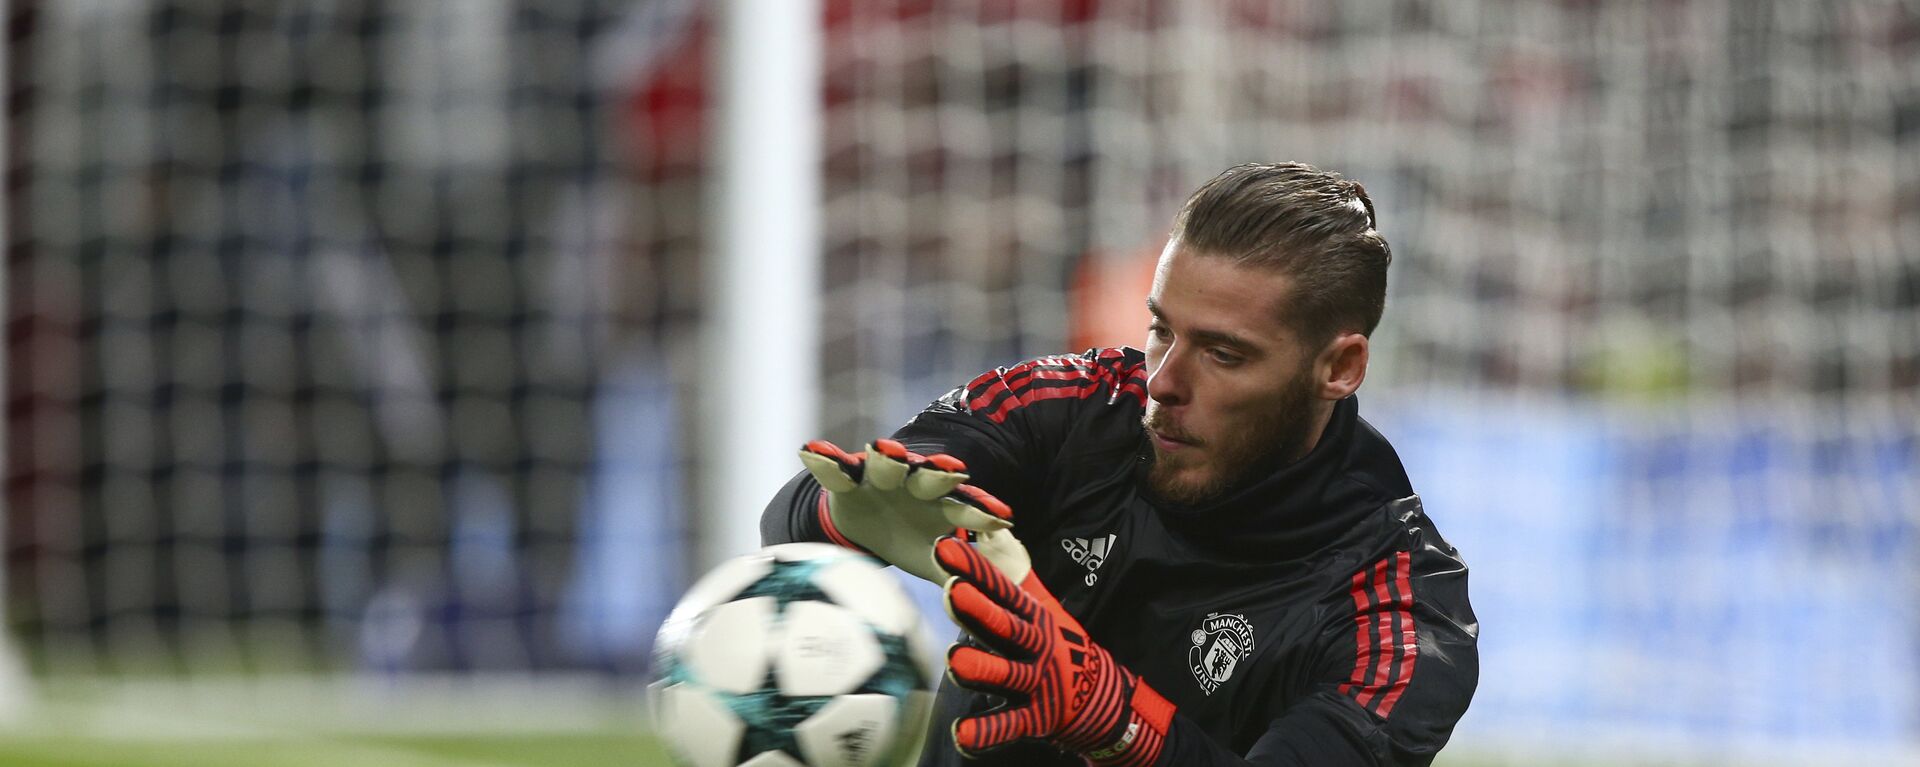 Manchester United goalkeeper David de Gea warms up before the Champions League group A soccer match between Manchester United and Benfica, at Old Trafford, in Manchester, England, Tuesday, Oct. 31, 2017 - اسپوتنیک افغانستان  , 1920, 14.09.2021